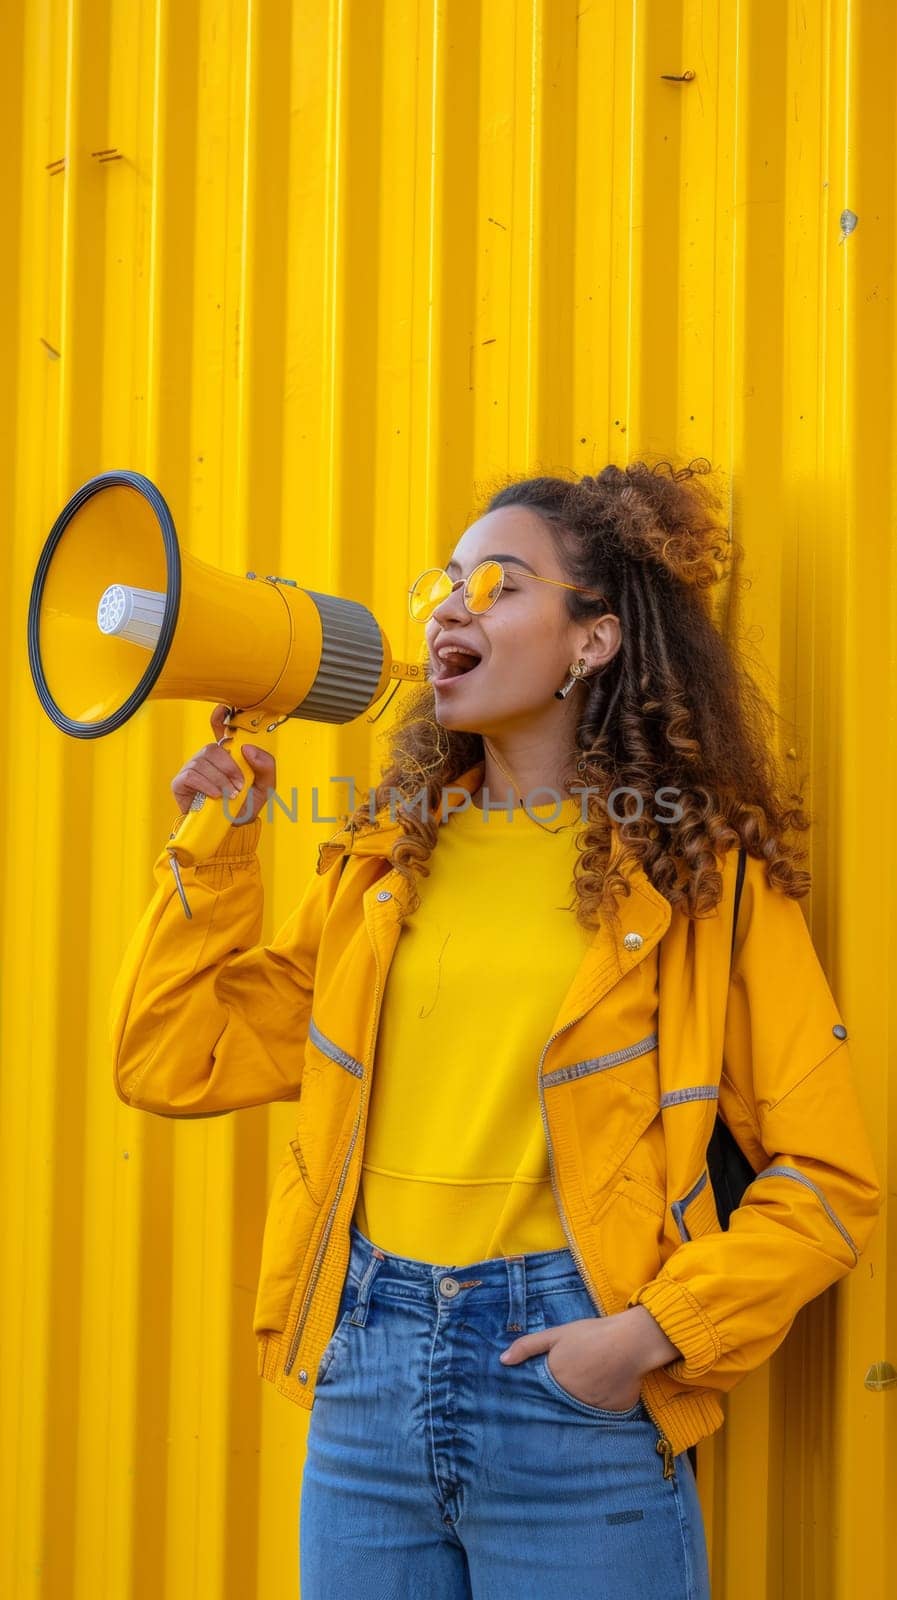 A woman in yellow jacket and jeans holding a megaphone, AI by starush